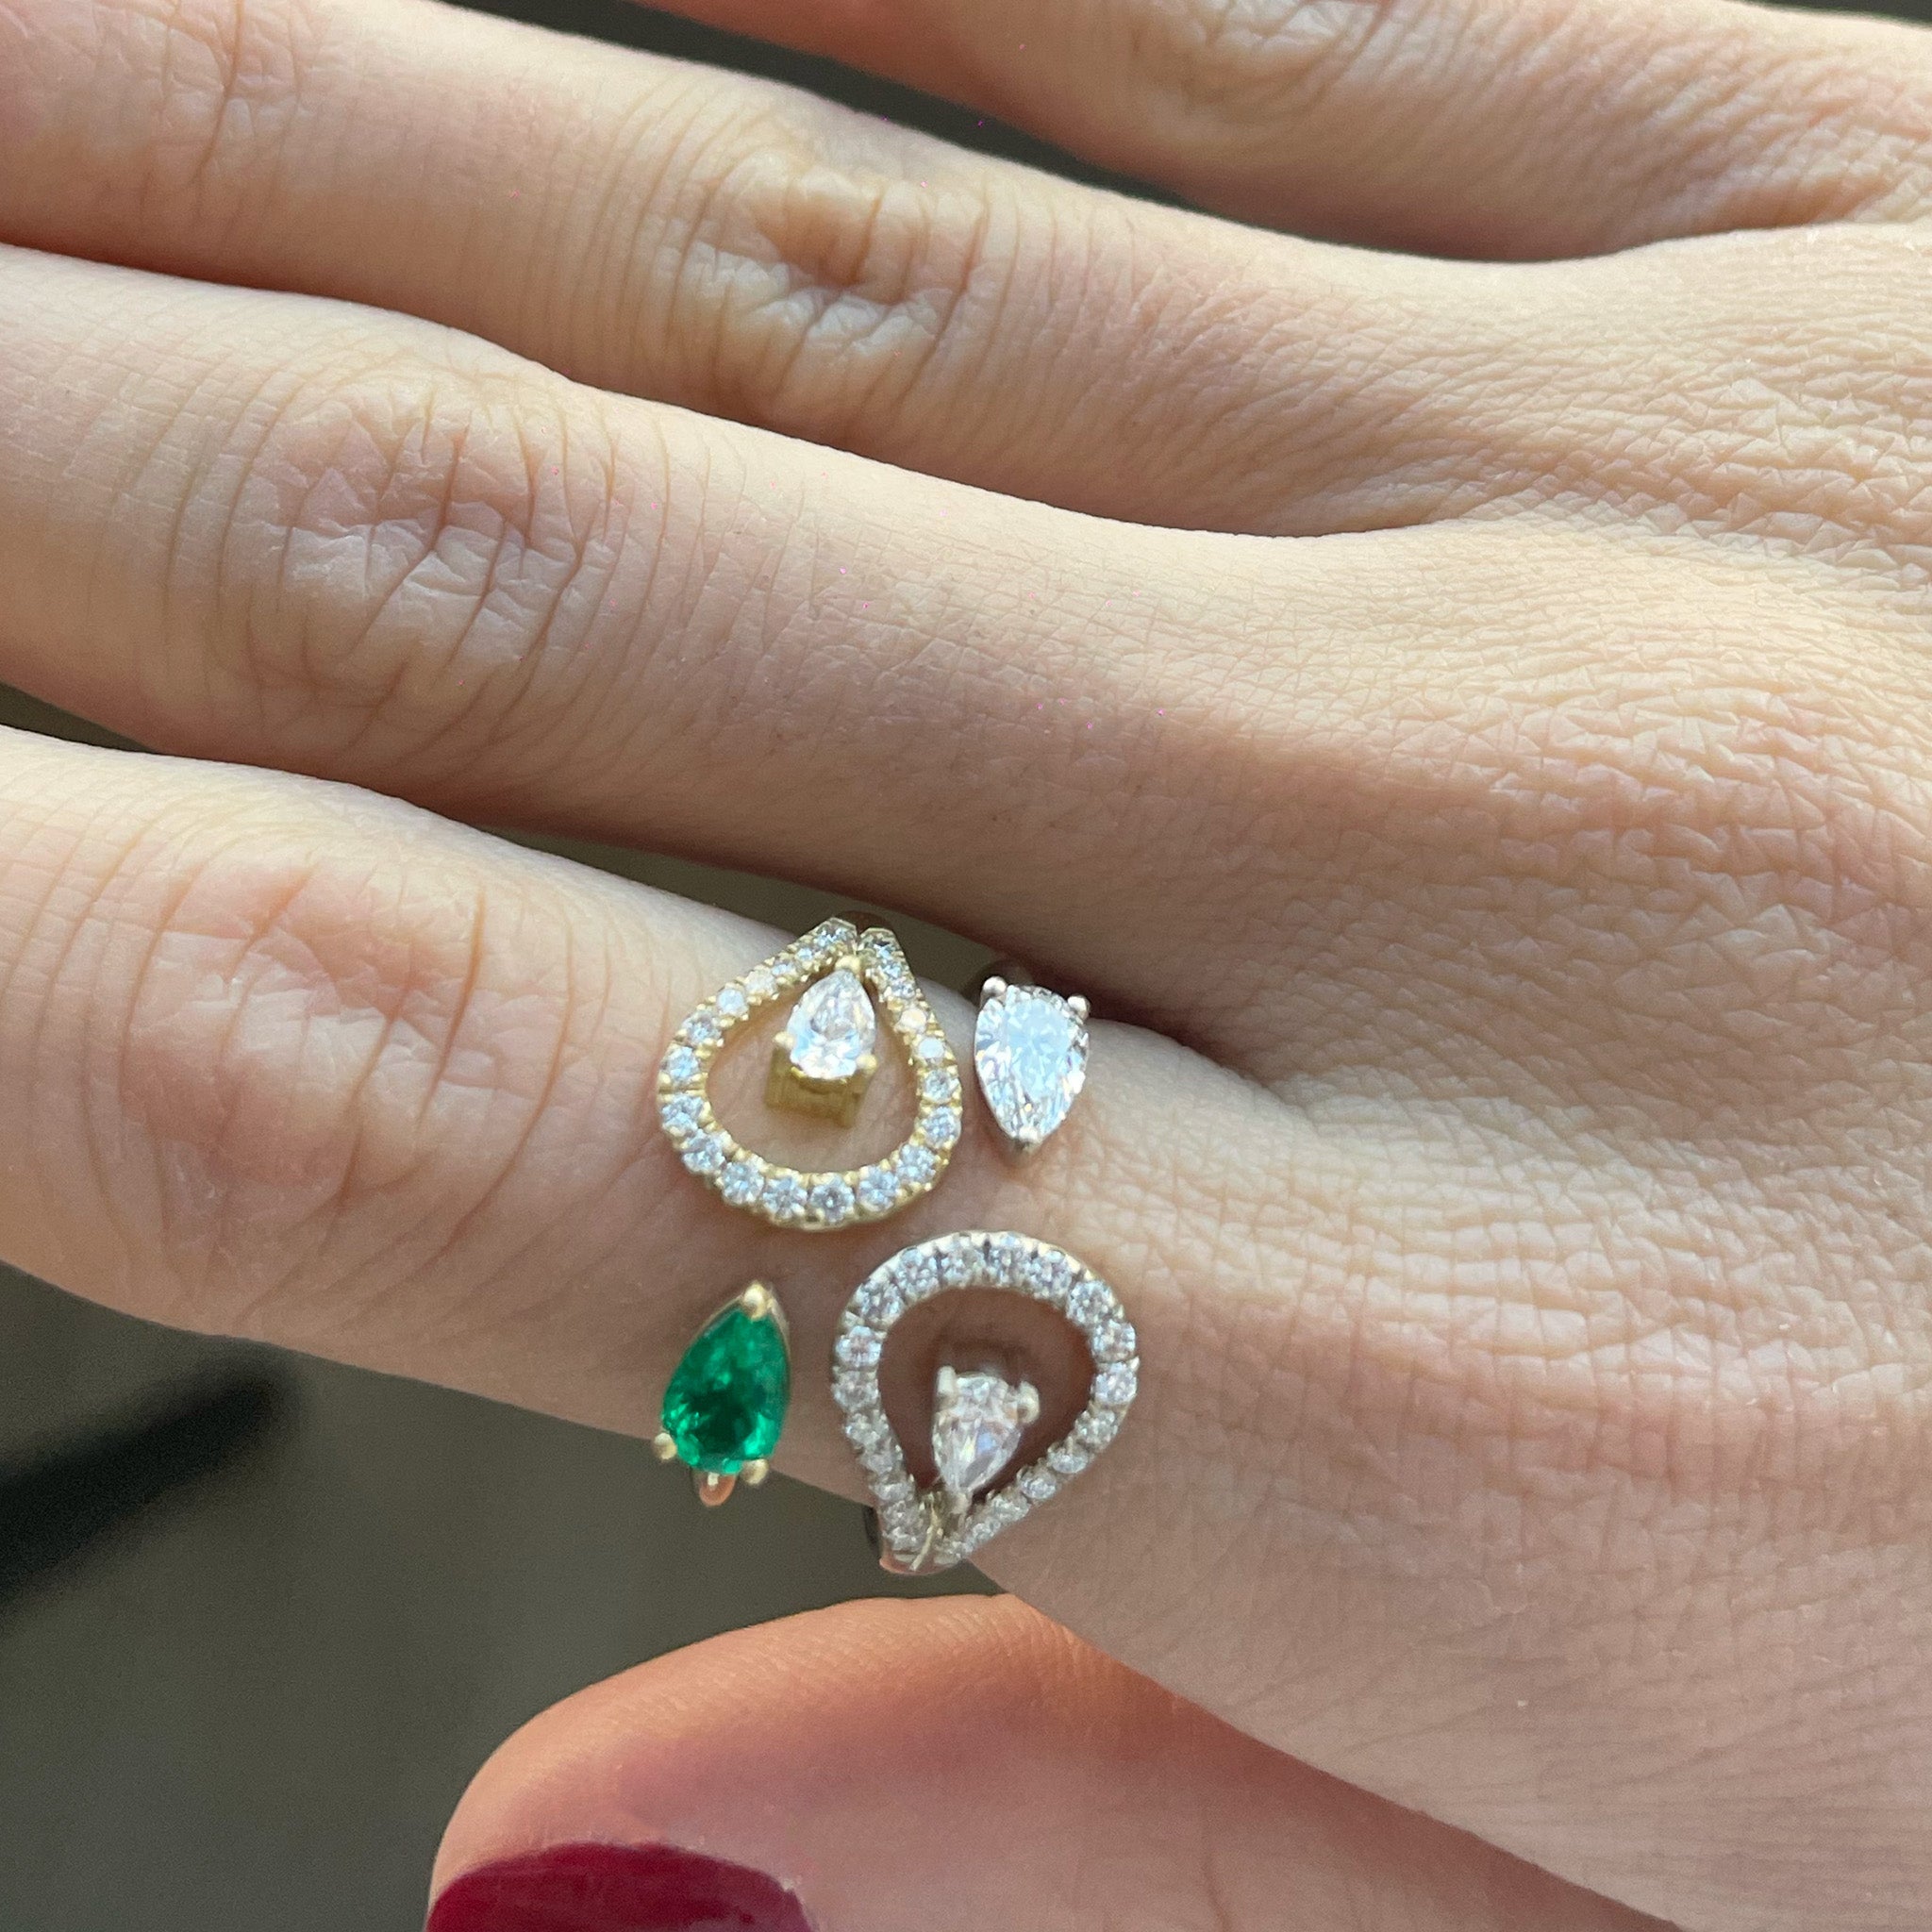 Two stunning rings  of the same design adorned with a vibrant single emerald stone and diamonds and a full diamond displayed on a hand model. 